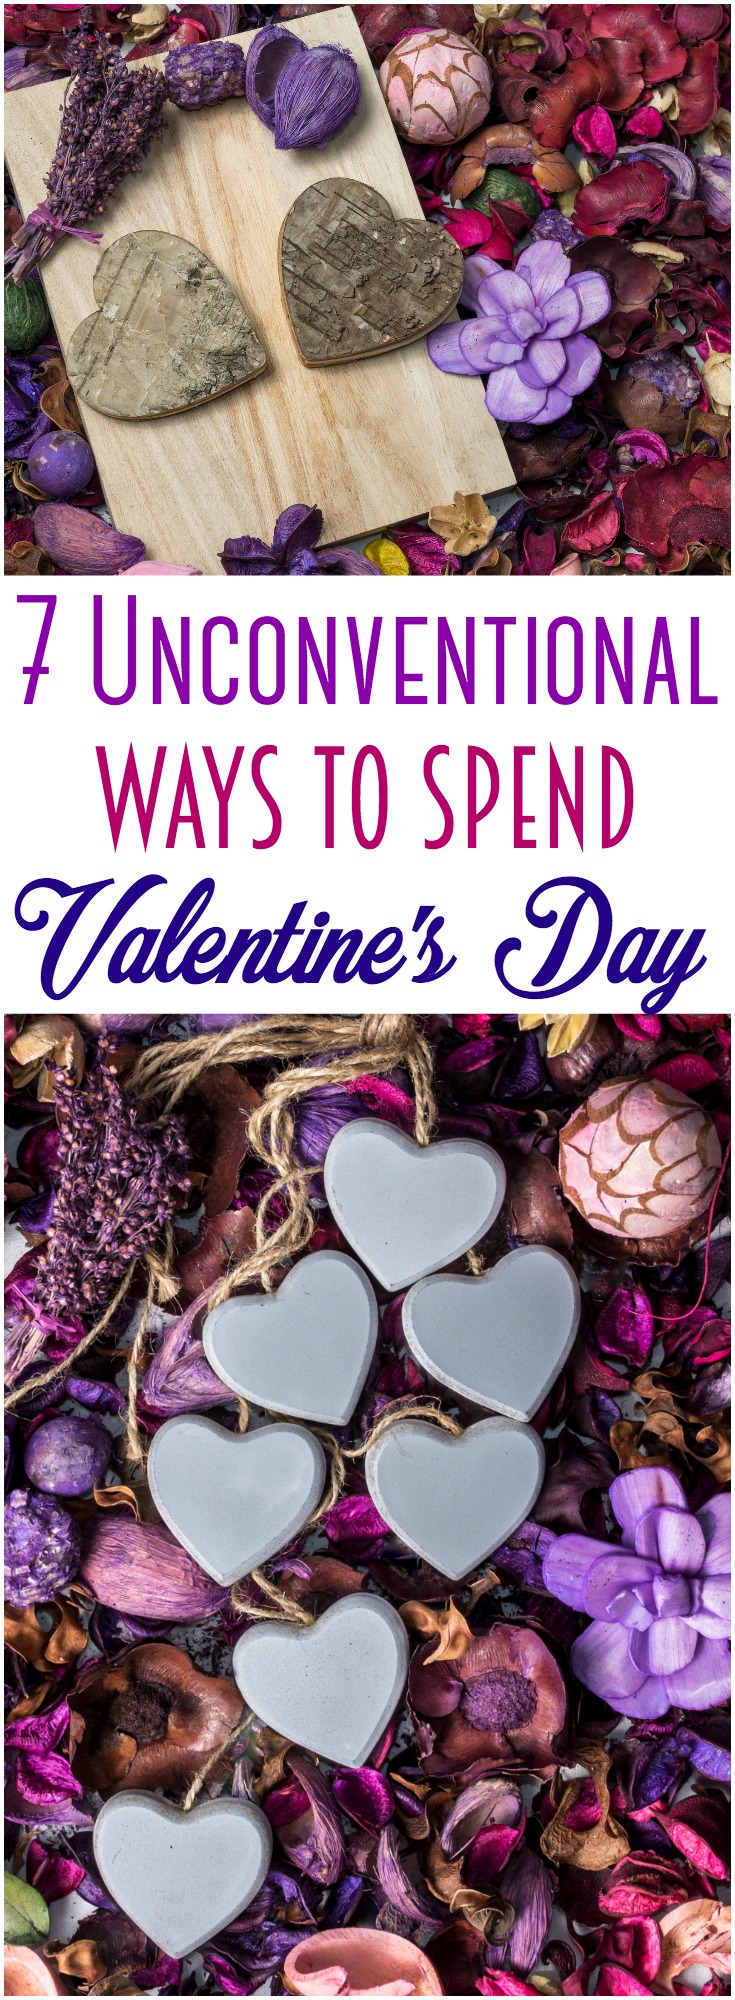 Every year, Valentine's Day entails the same thing: dinner, a movie, chocolates or flowers. This year, change it up a bit ~ here are 7 unique date ideas for Valentine's Day. #ValentinesDay #love #datenight #marriage #dating #savingmoney